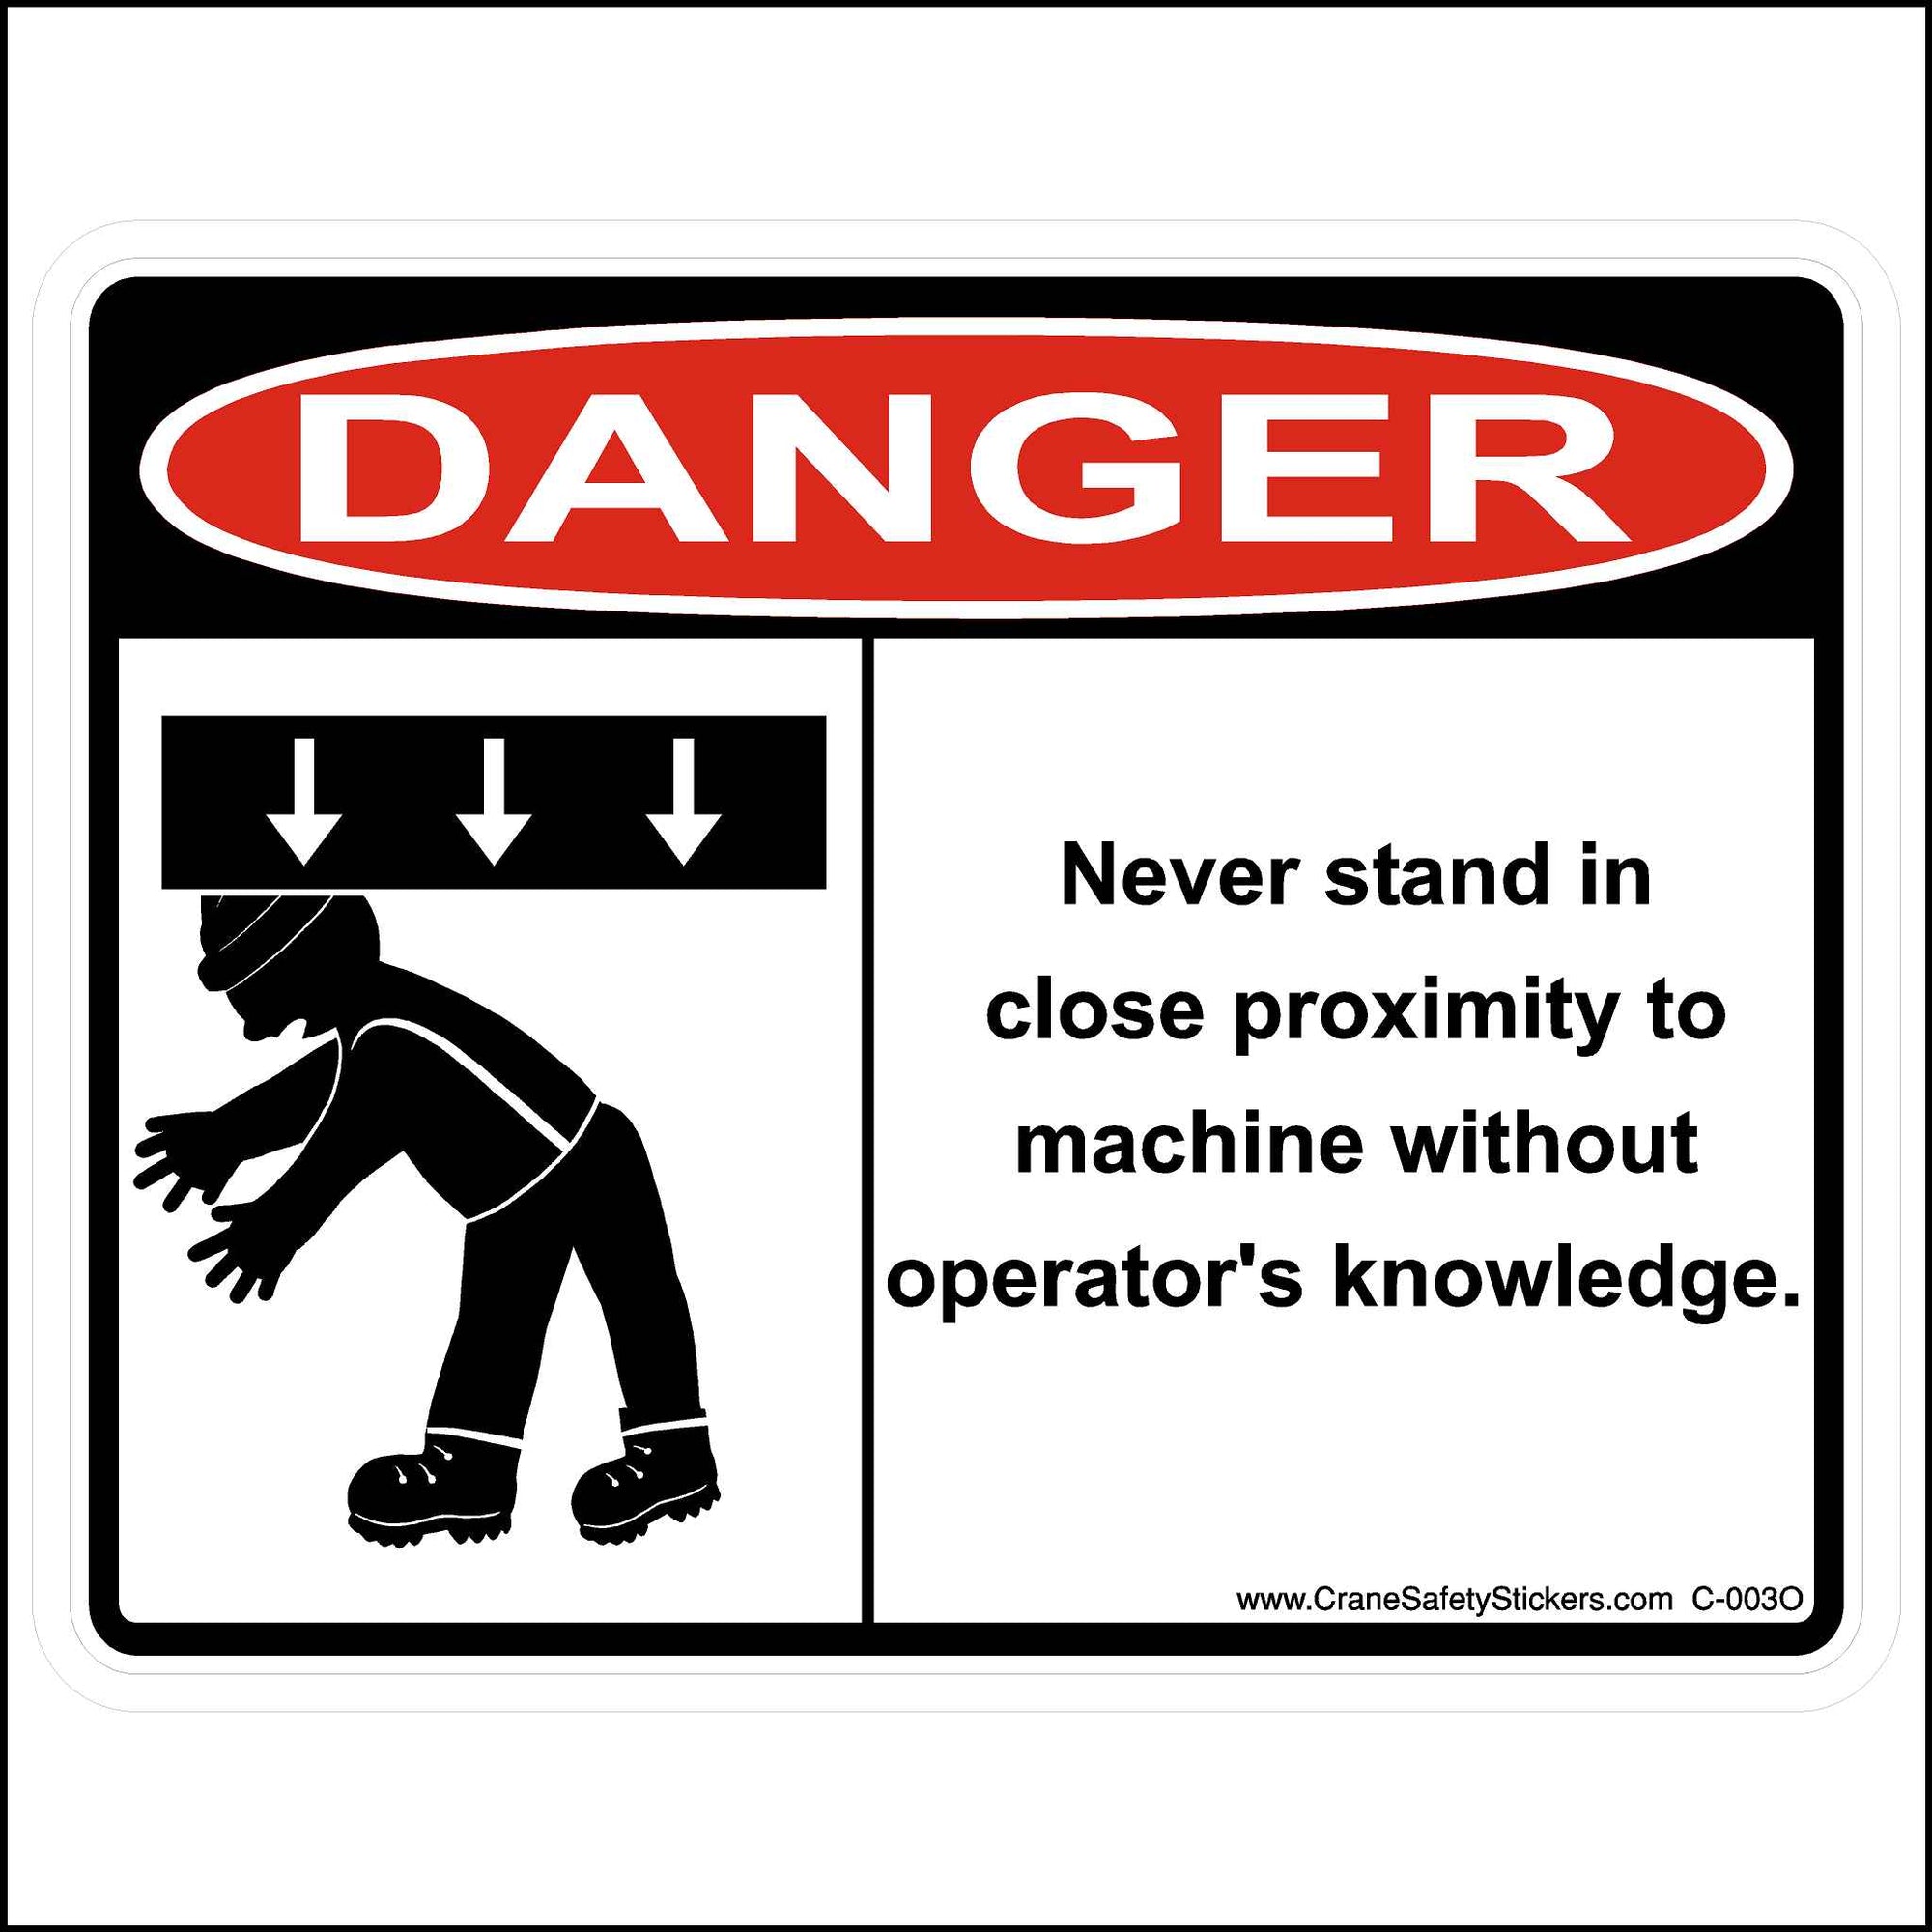 OSHA Crane Safety Sticker. Danger, never stand in close proximity to machine without operator's knowledge decal..